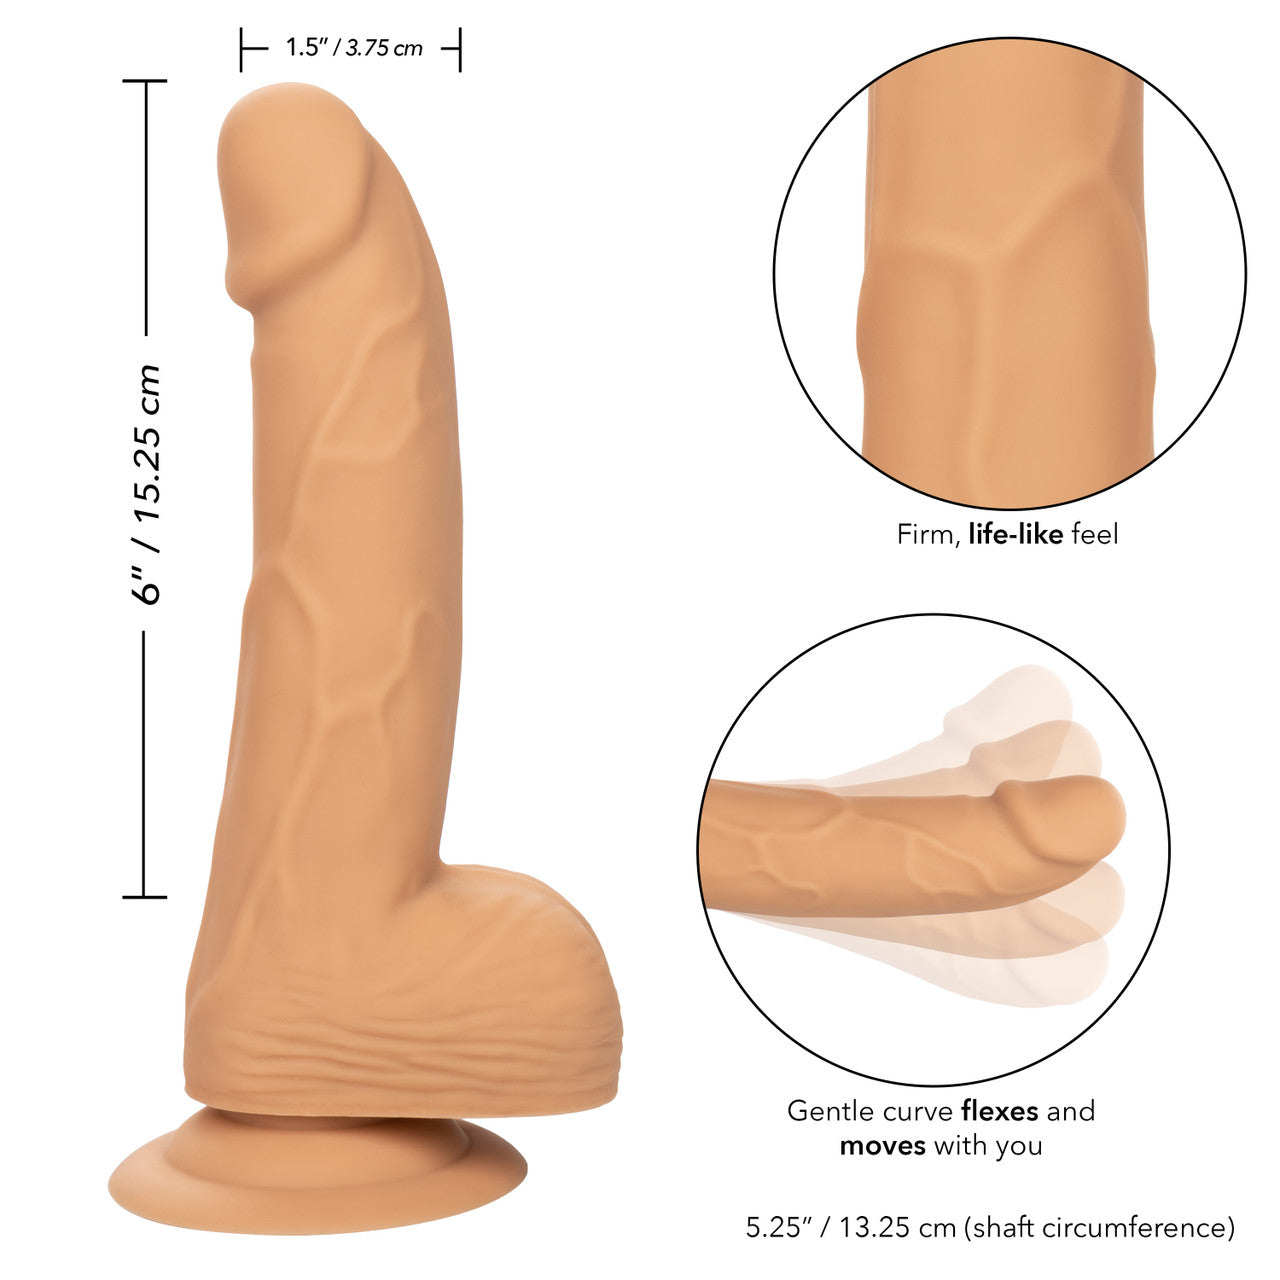 Silicone Studs Realistic Dildo - 6"/15.25 cm, Ivory - Thorn & Feather Sex Toy Canada